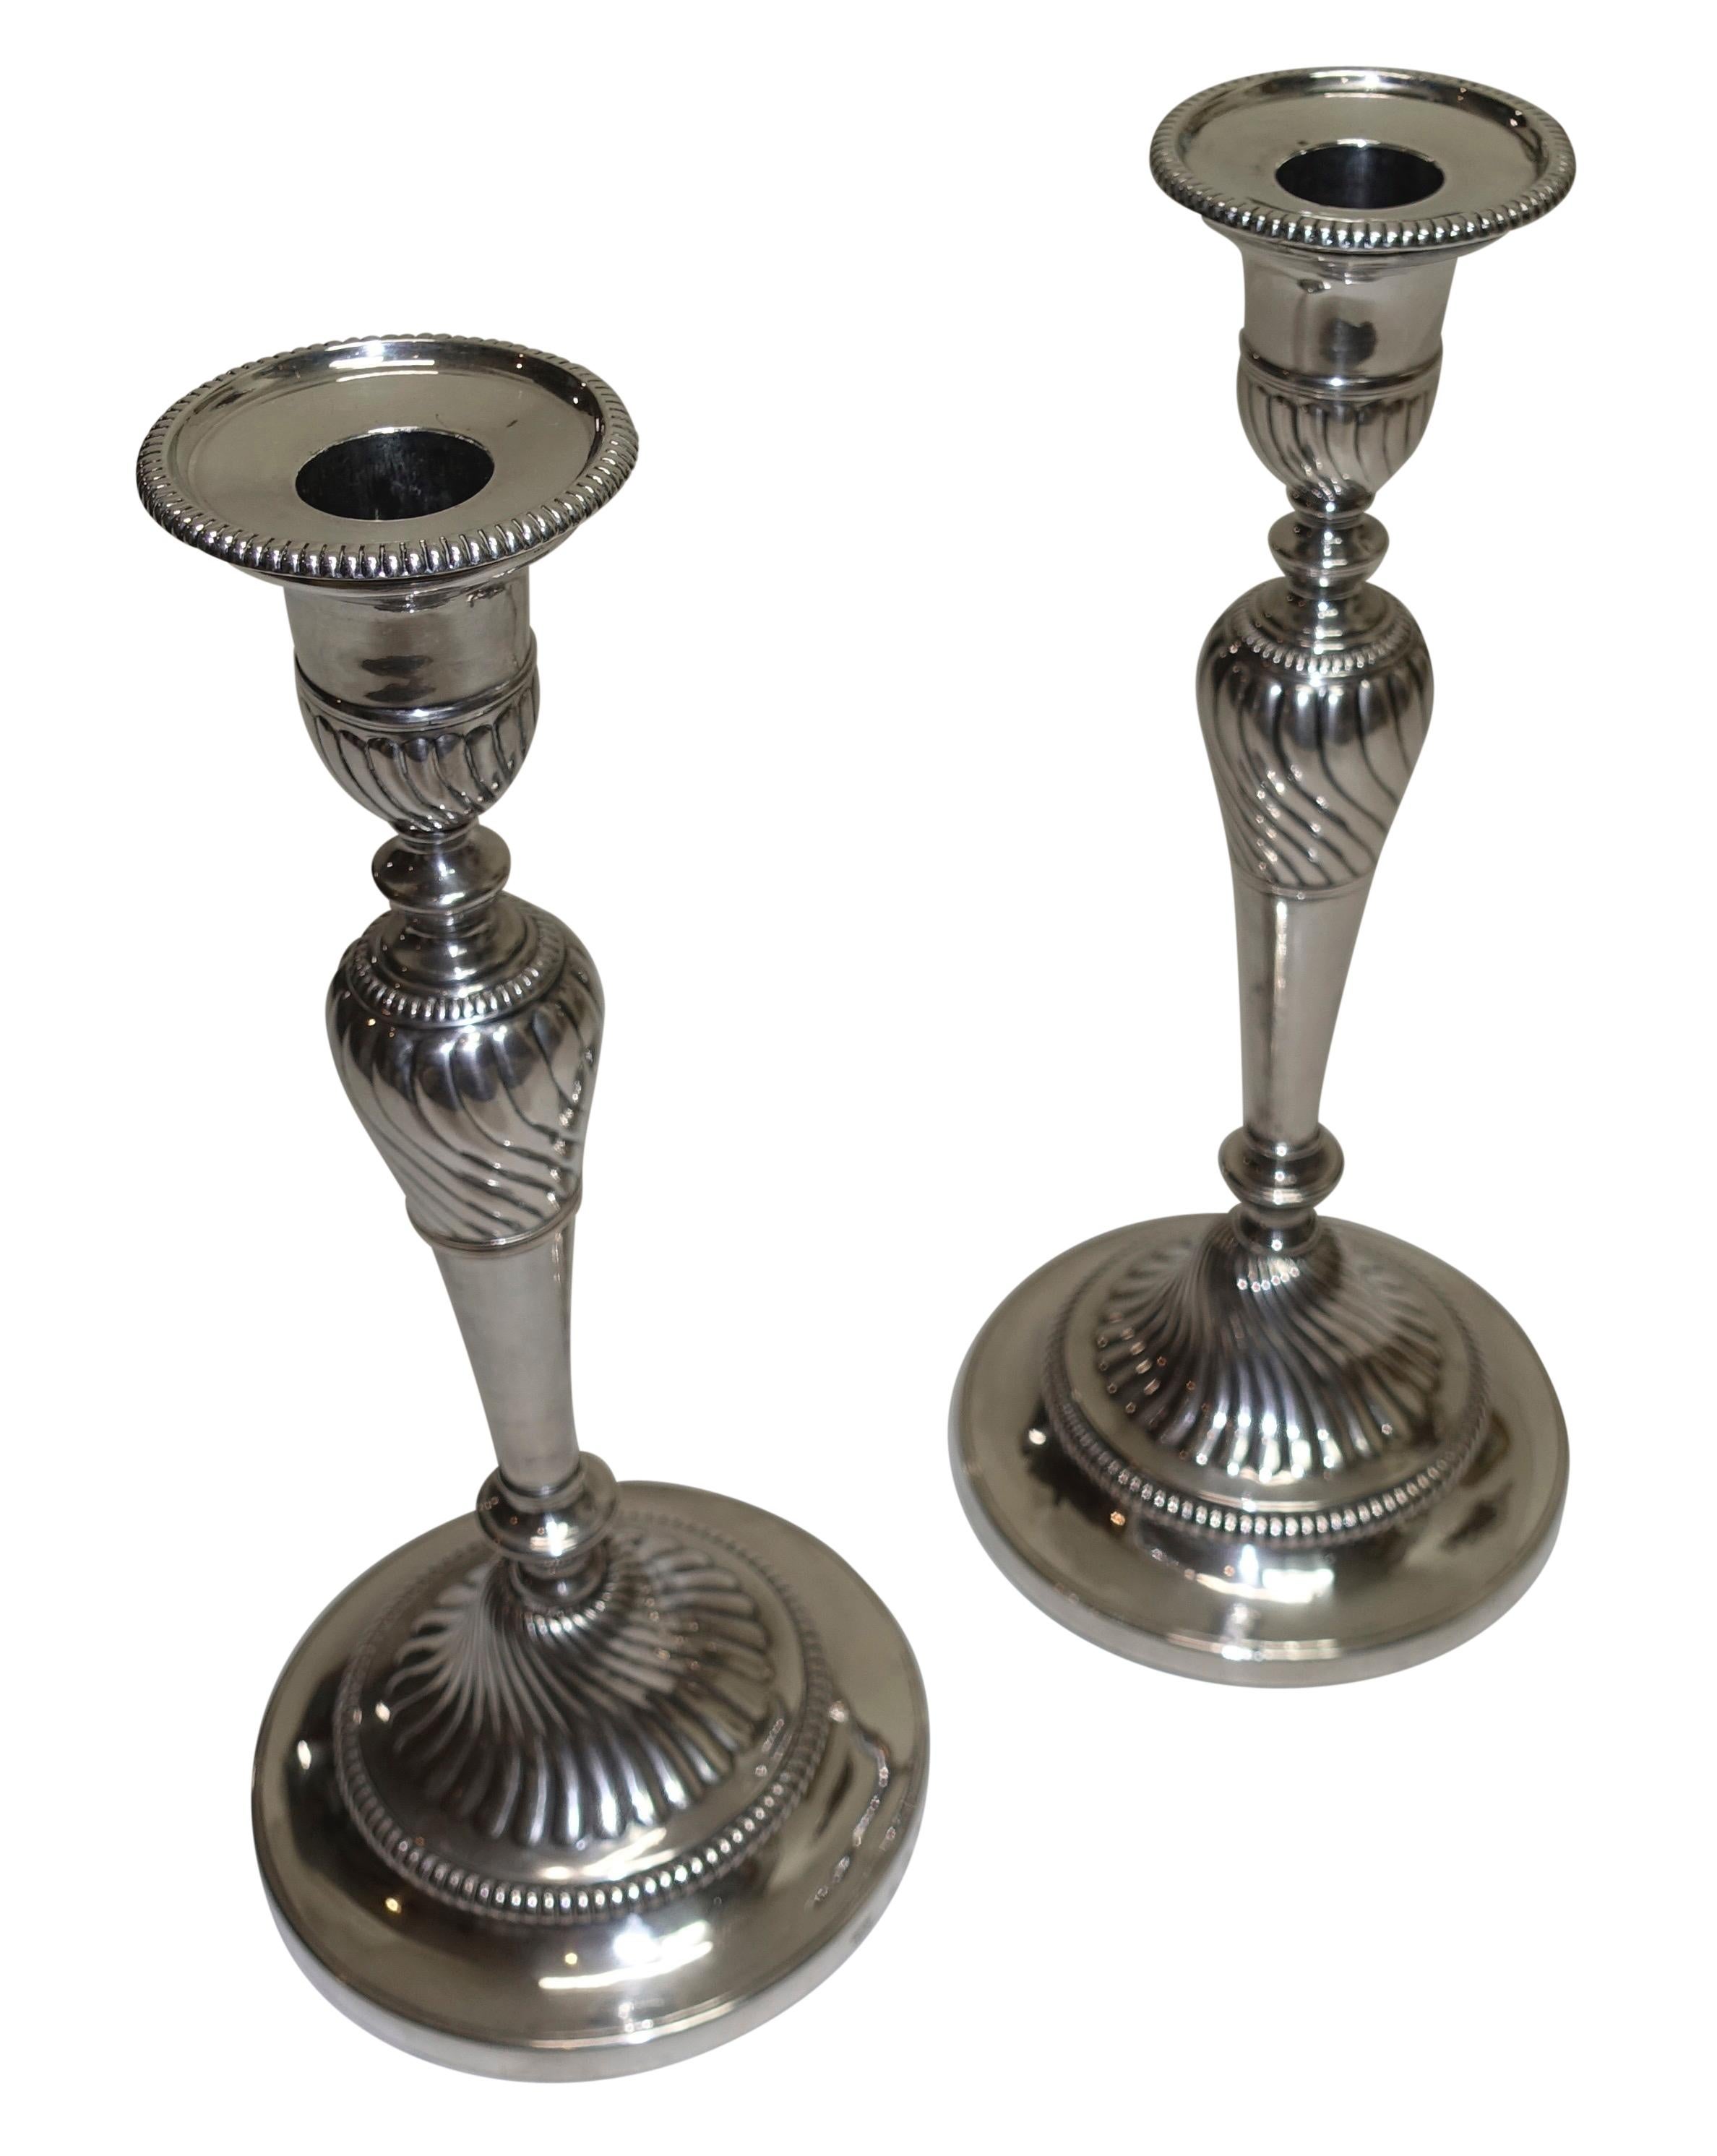 A pair of George III sterling silver candlesticks with weighted bases made by I G & CO., John Green, Roberts, Mosley & Co. Fully hallmarked on the bases and the bobeche, England, late 18th-early 19th century.